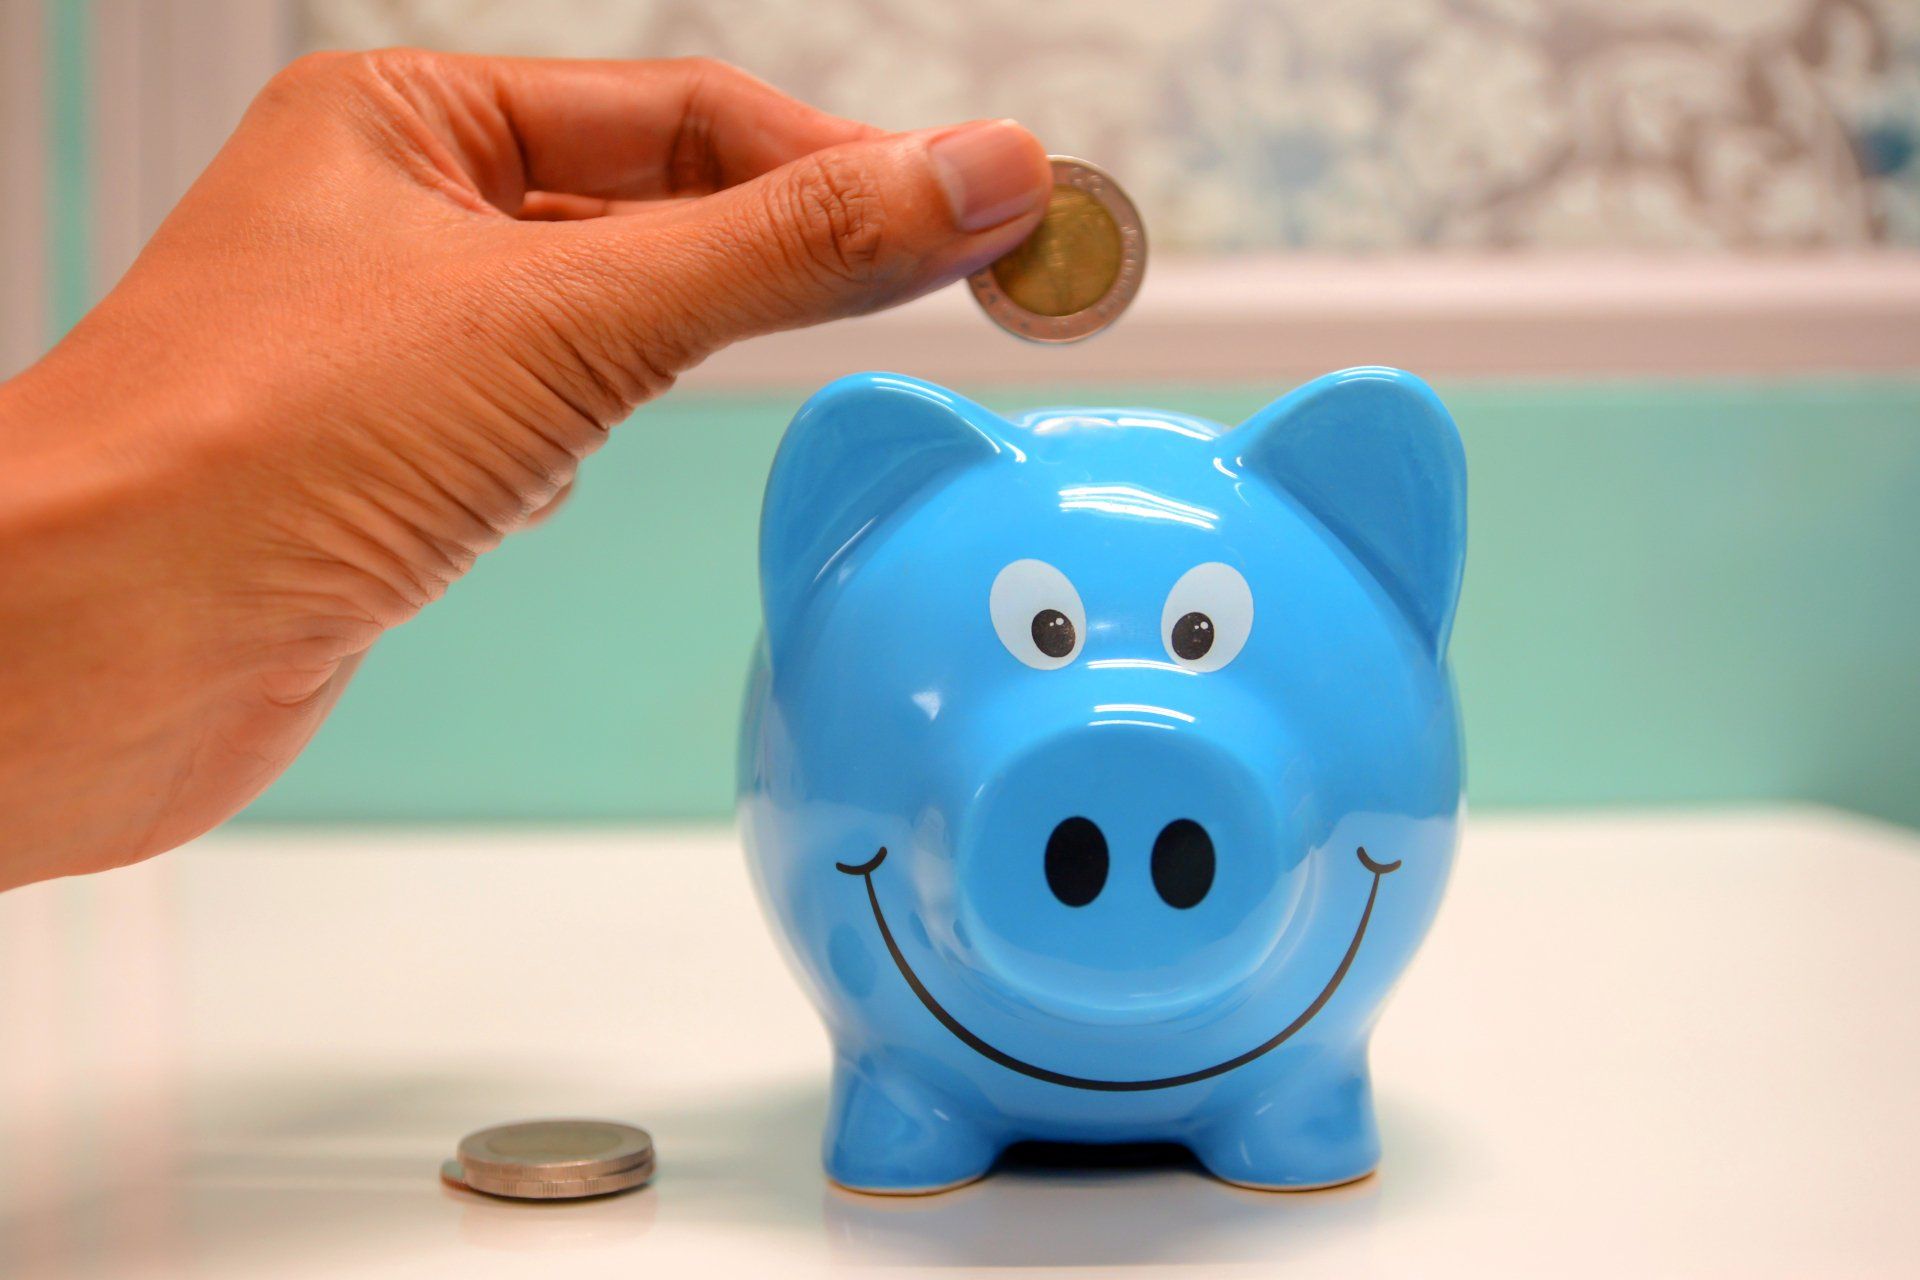 A picture of a person putting money into a piggy bank